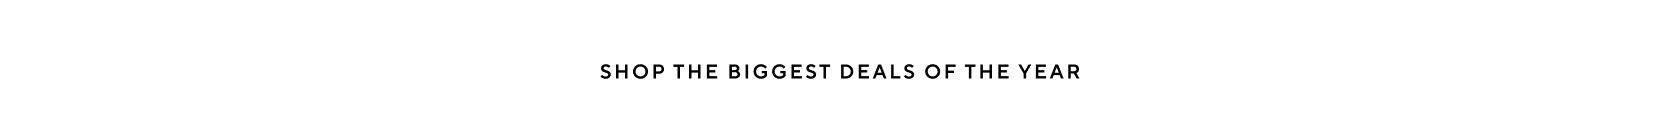 Shop the biggest deals of the year.